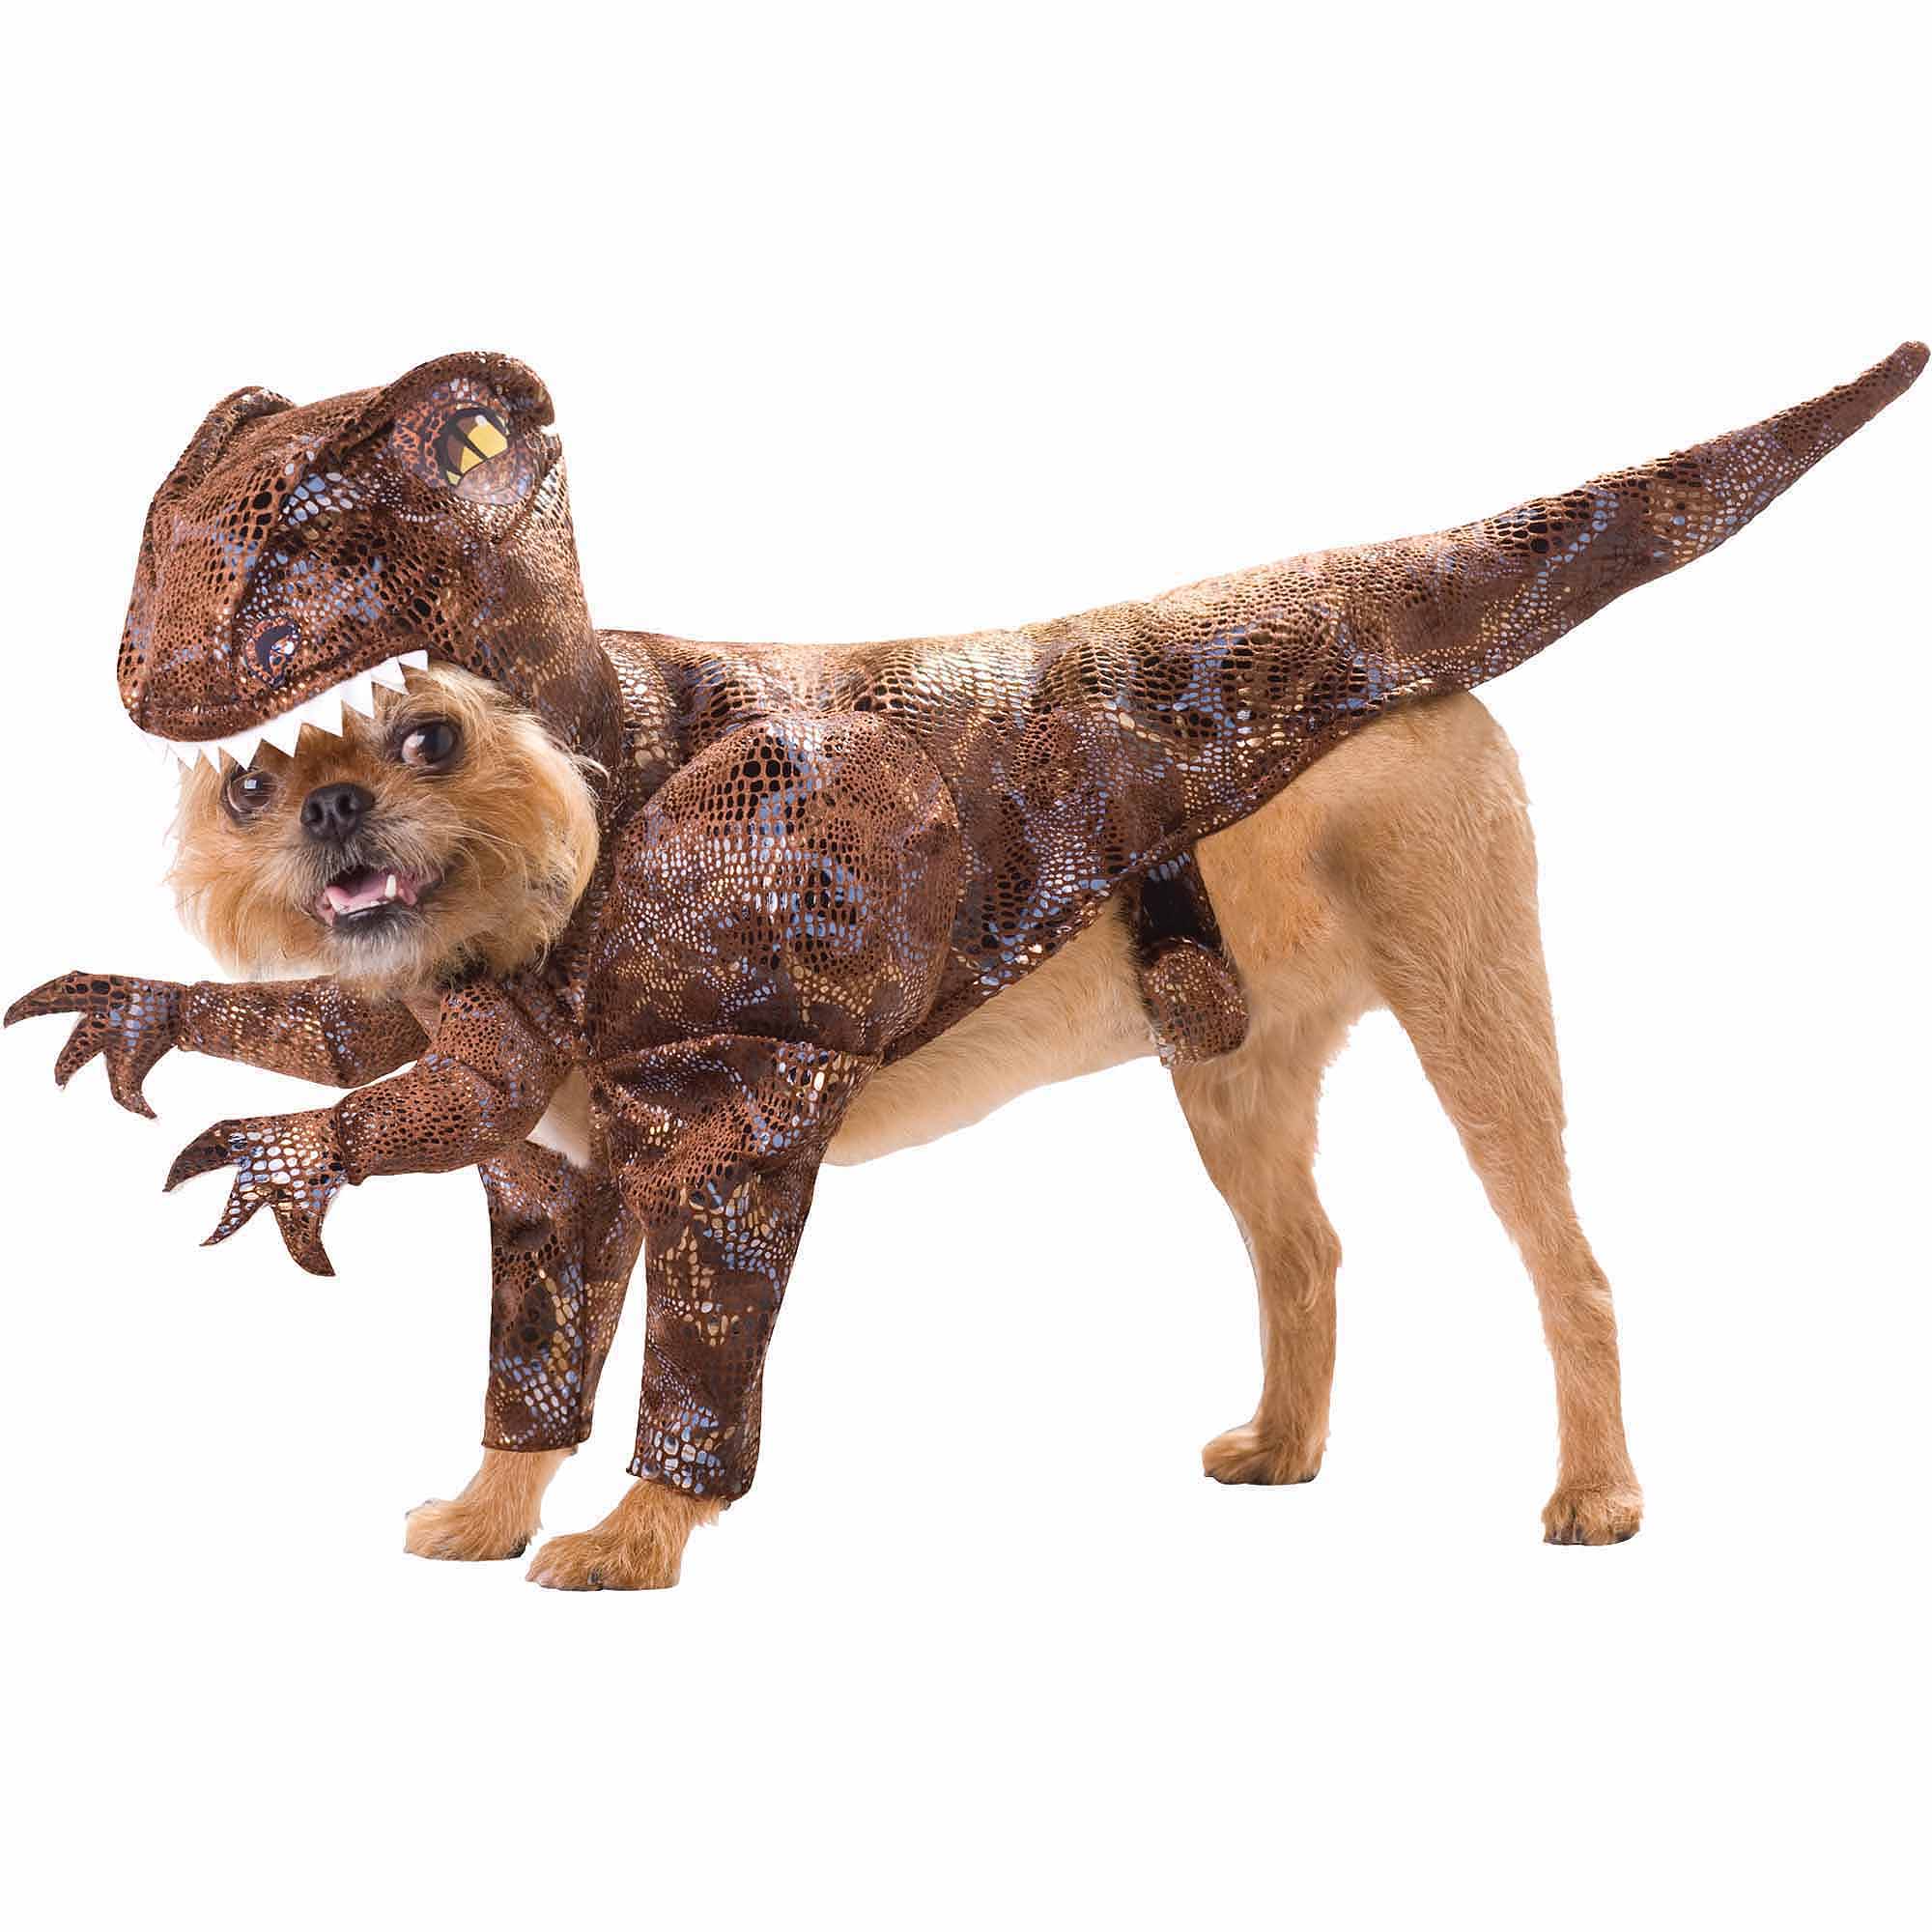 Raptor Animal Planet Halloween Pet Costume (Multiple Sizes Available) - image 1 of 1